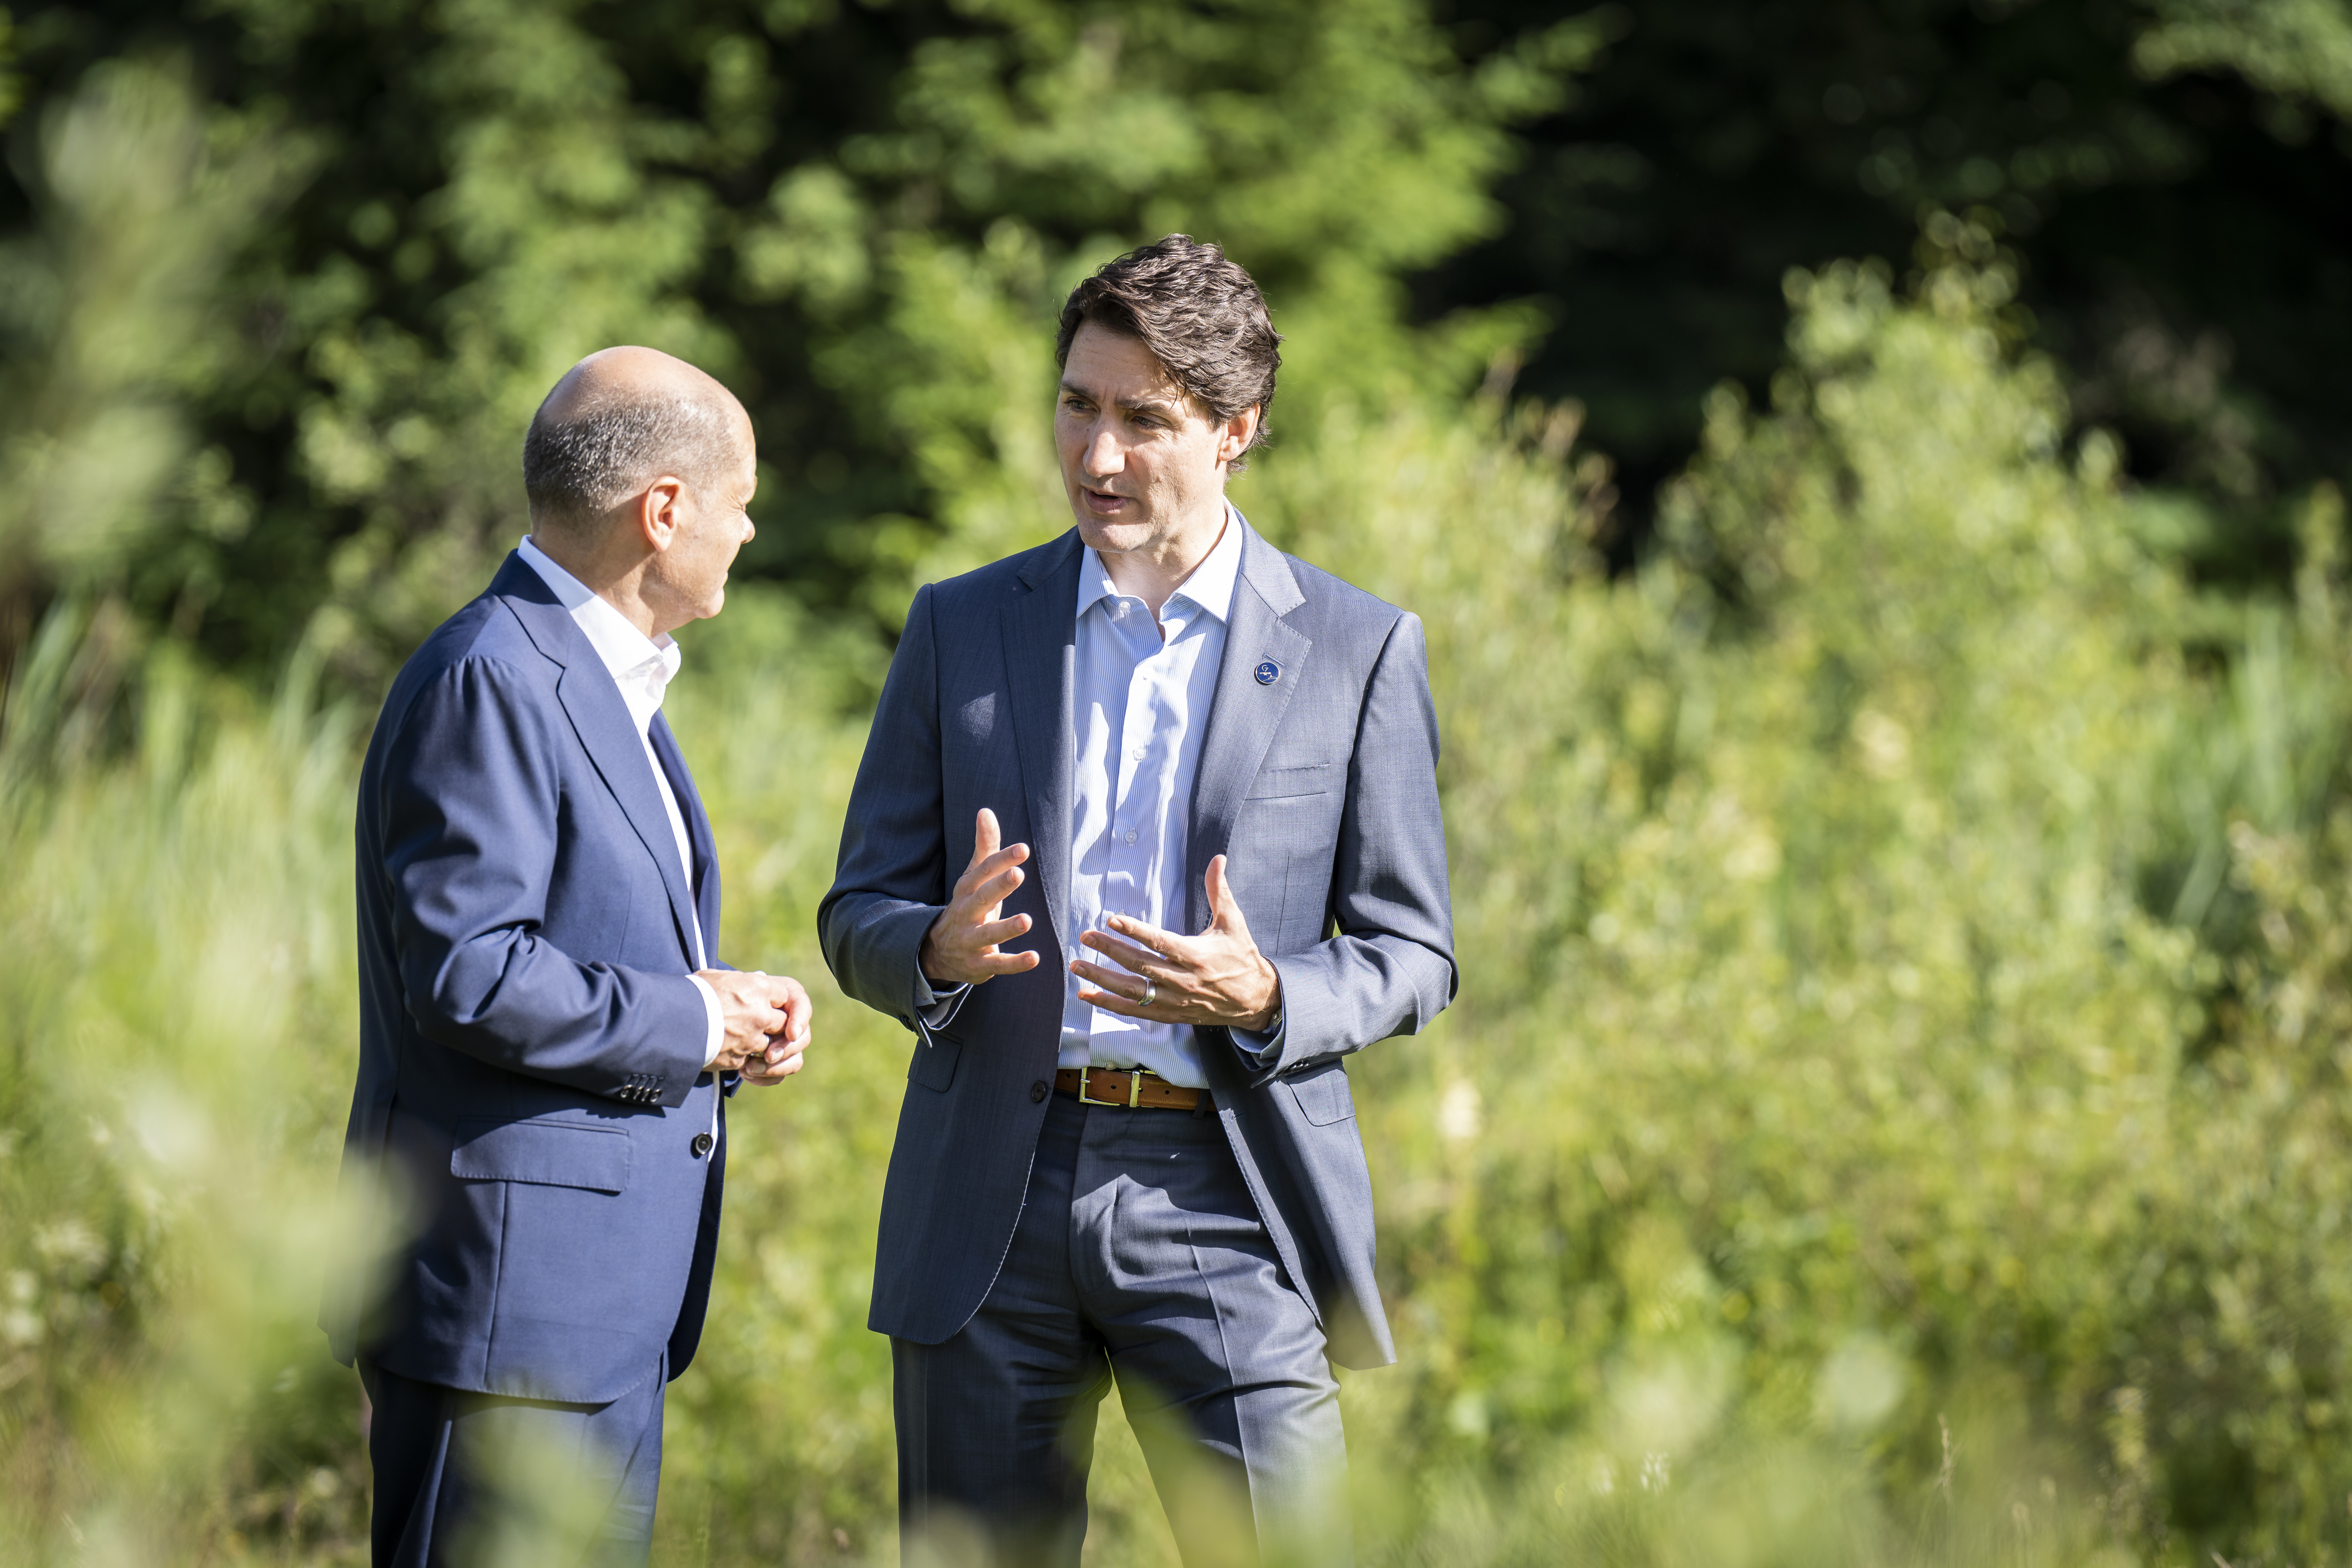 Federal Chancellor Olaf Scholz and Canadian Prime Minister Justin Trudeau engage in bilateral talks during a walk.